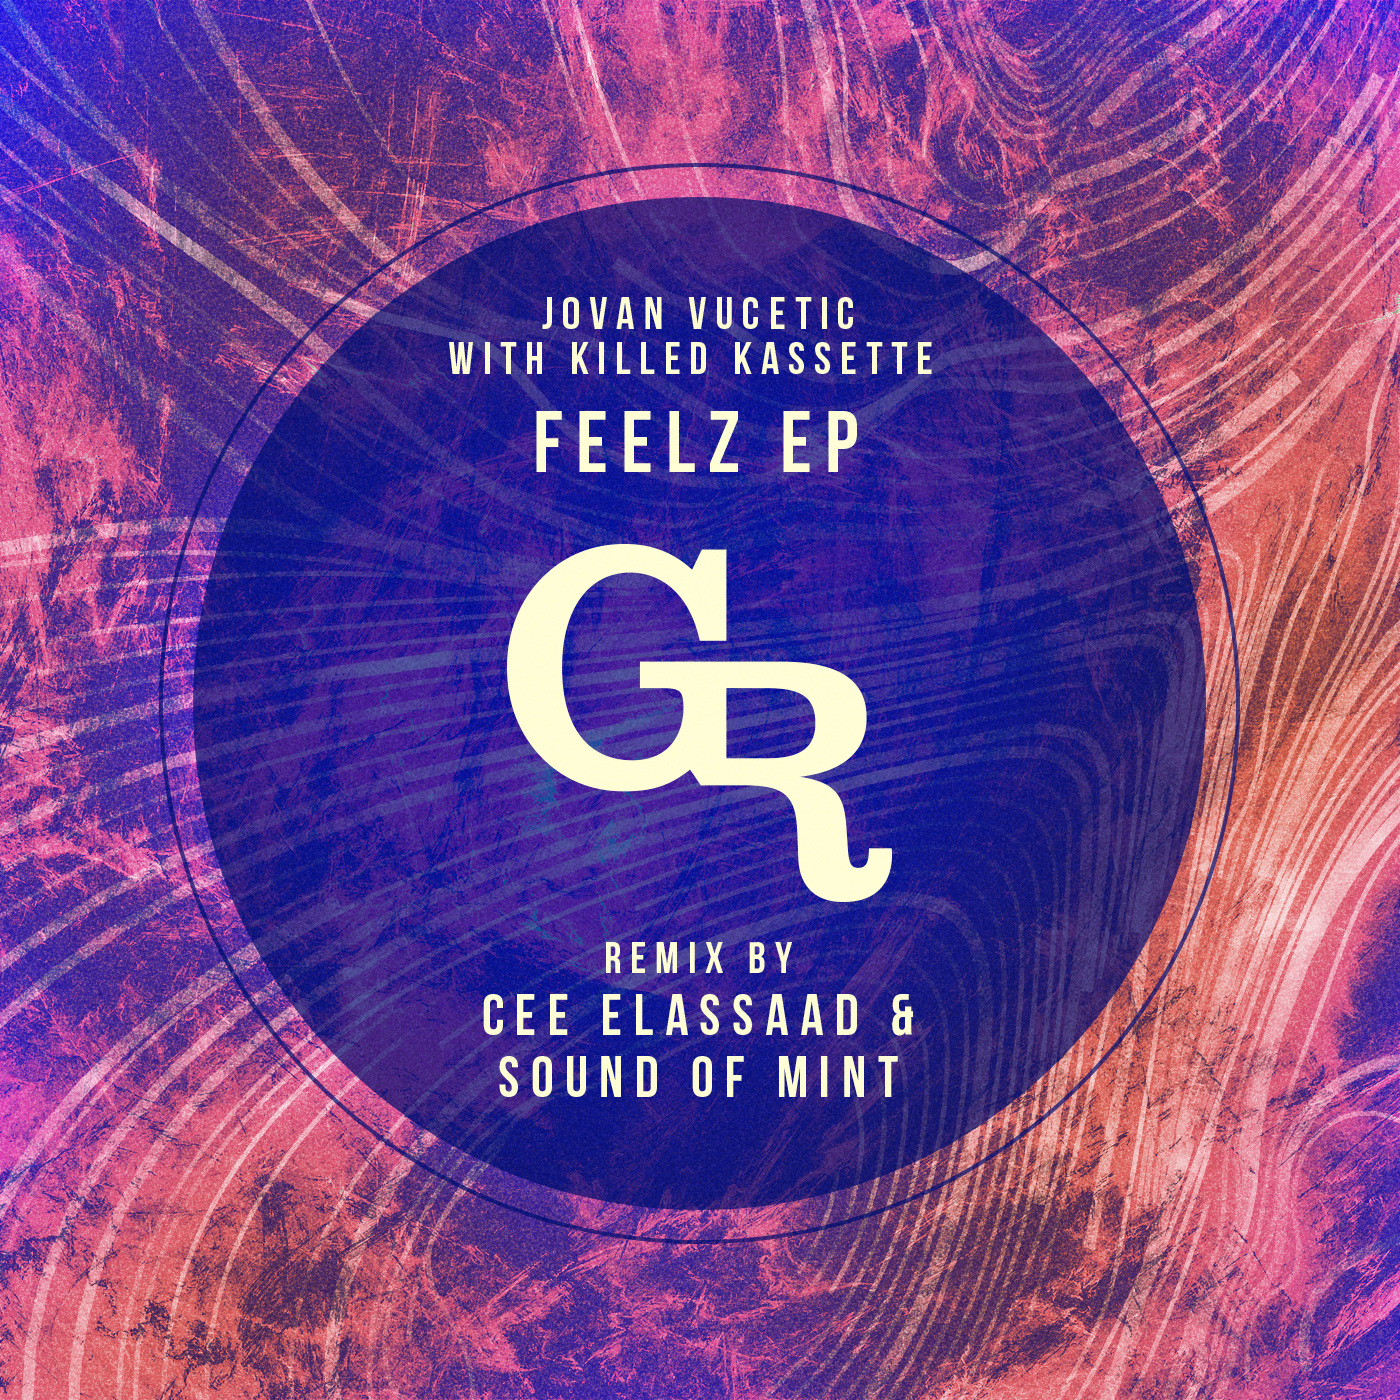 Jovan Vucetic - Feelz EP / Griffintown Records